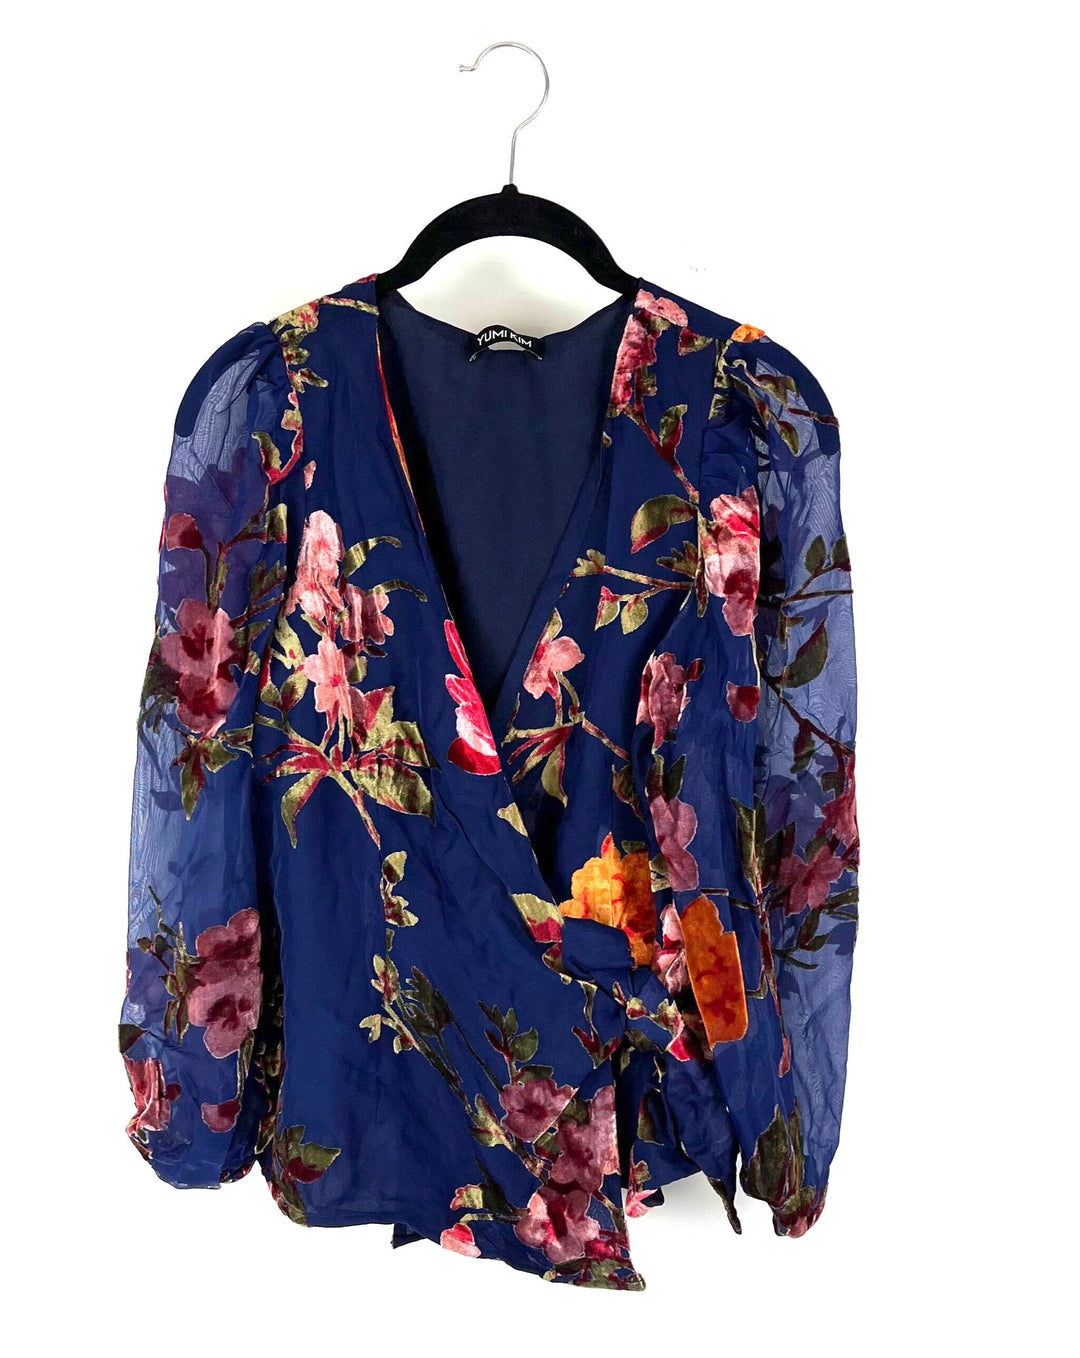 Dark Blue Velvet Floral Blouse - Extra Small and Small